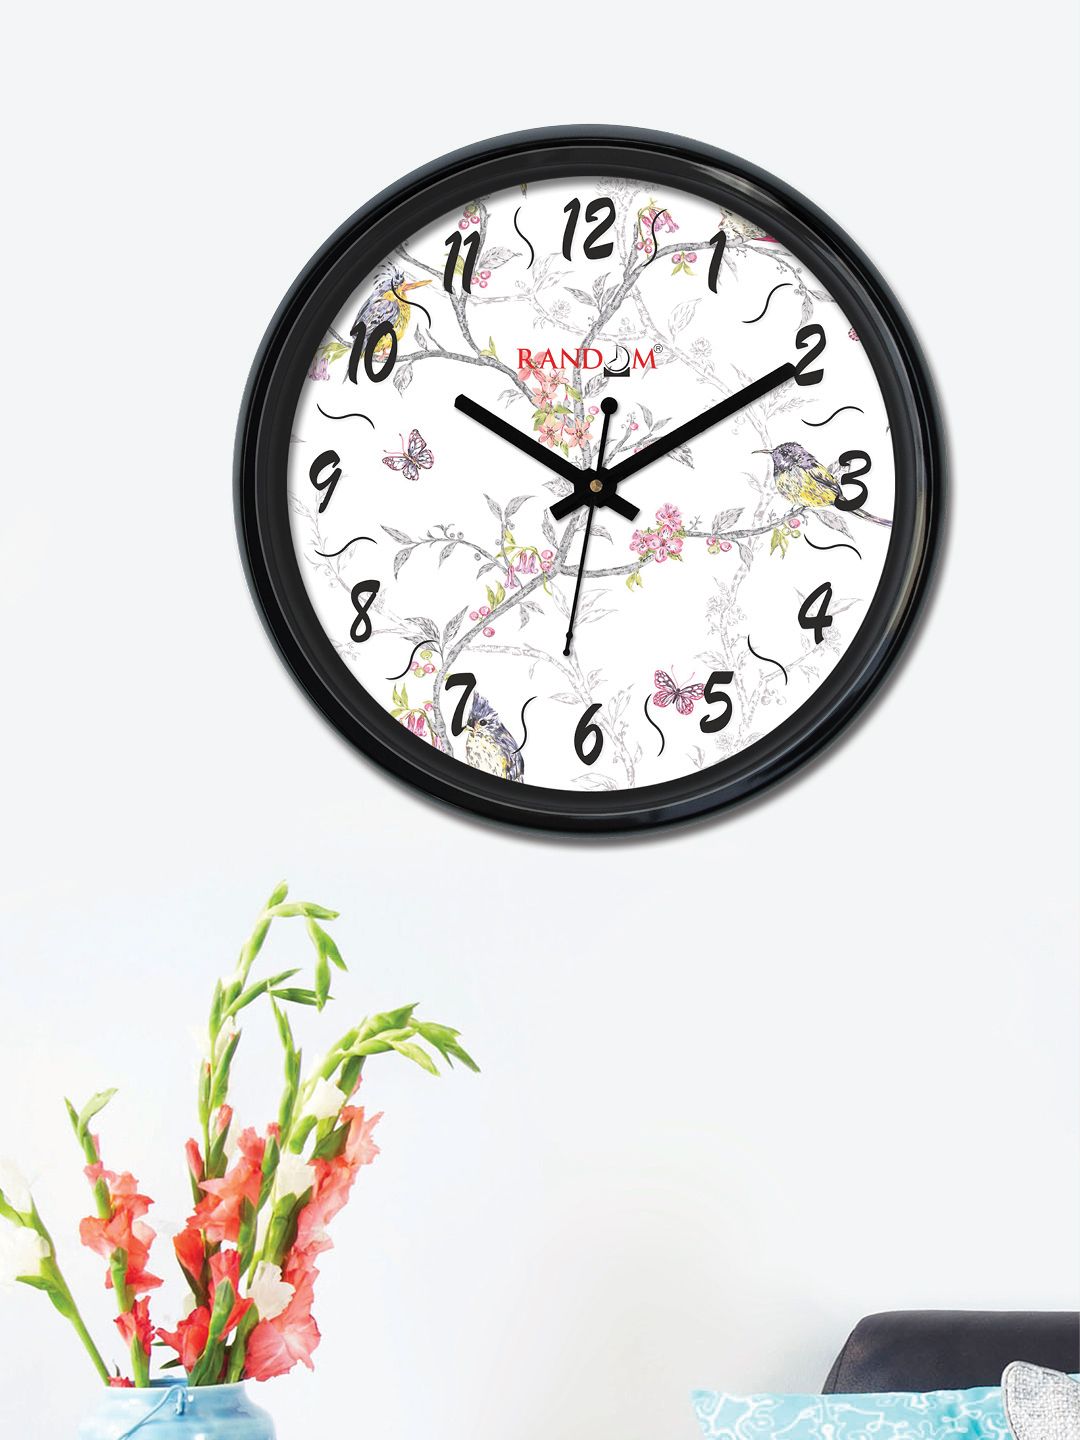 RANDOM Off-White Round Printed Analogue Wall Clock RC-6458 Price in India